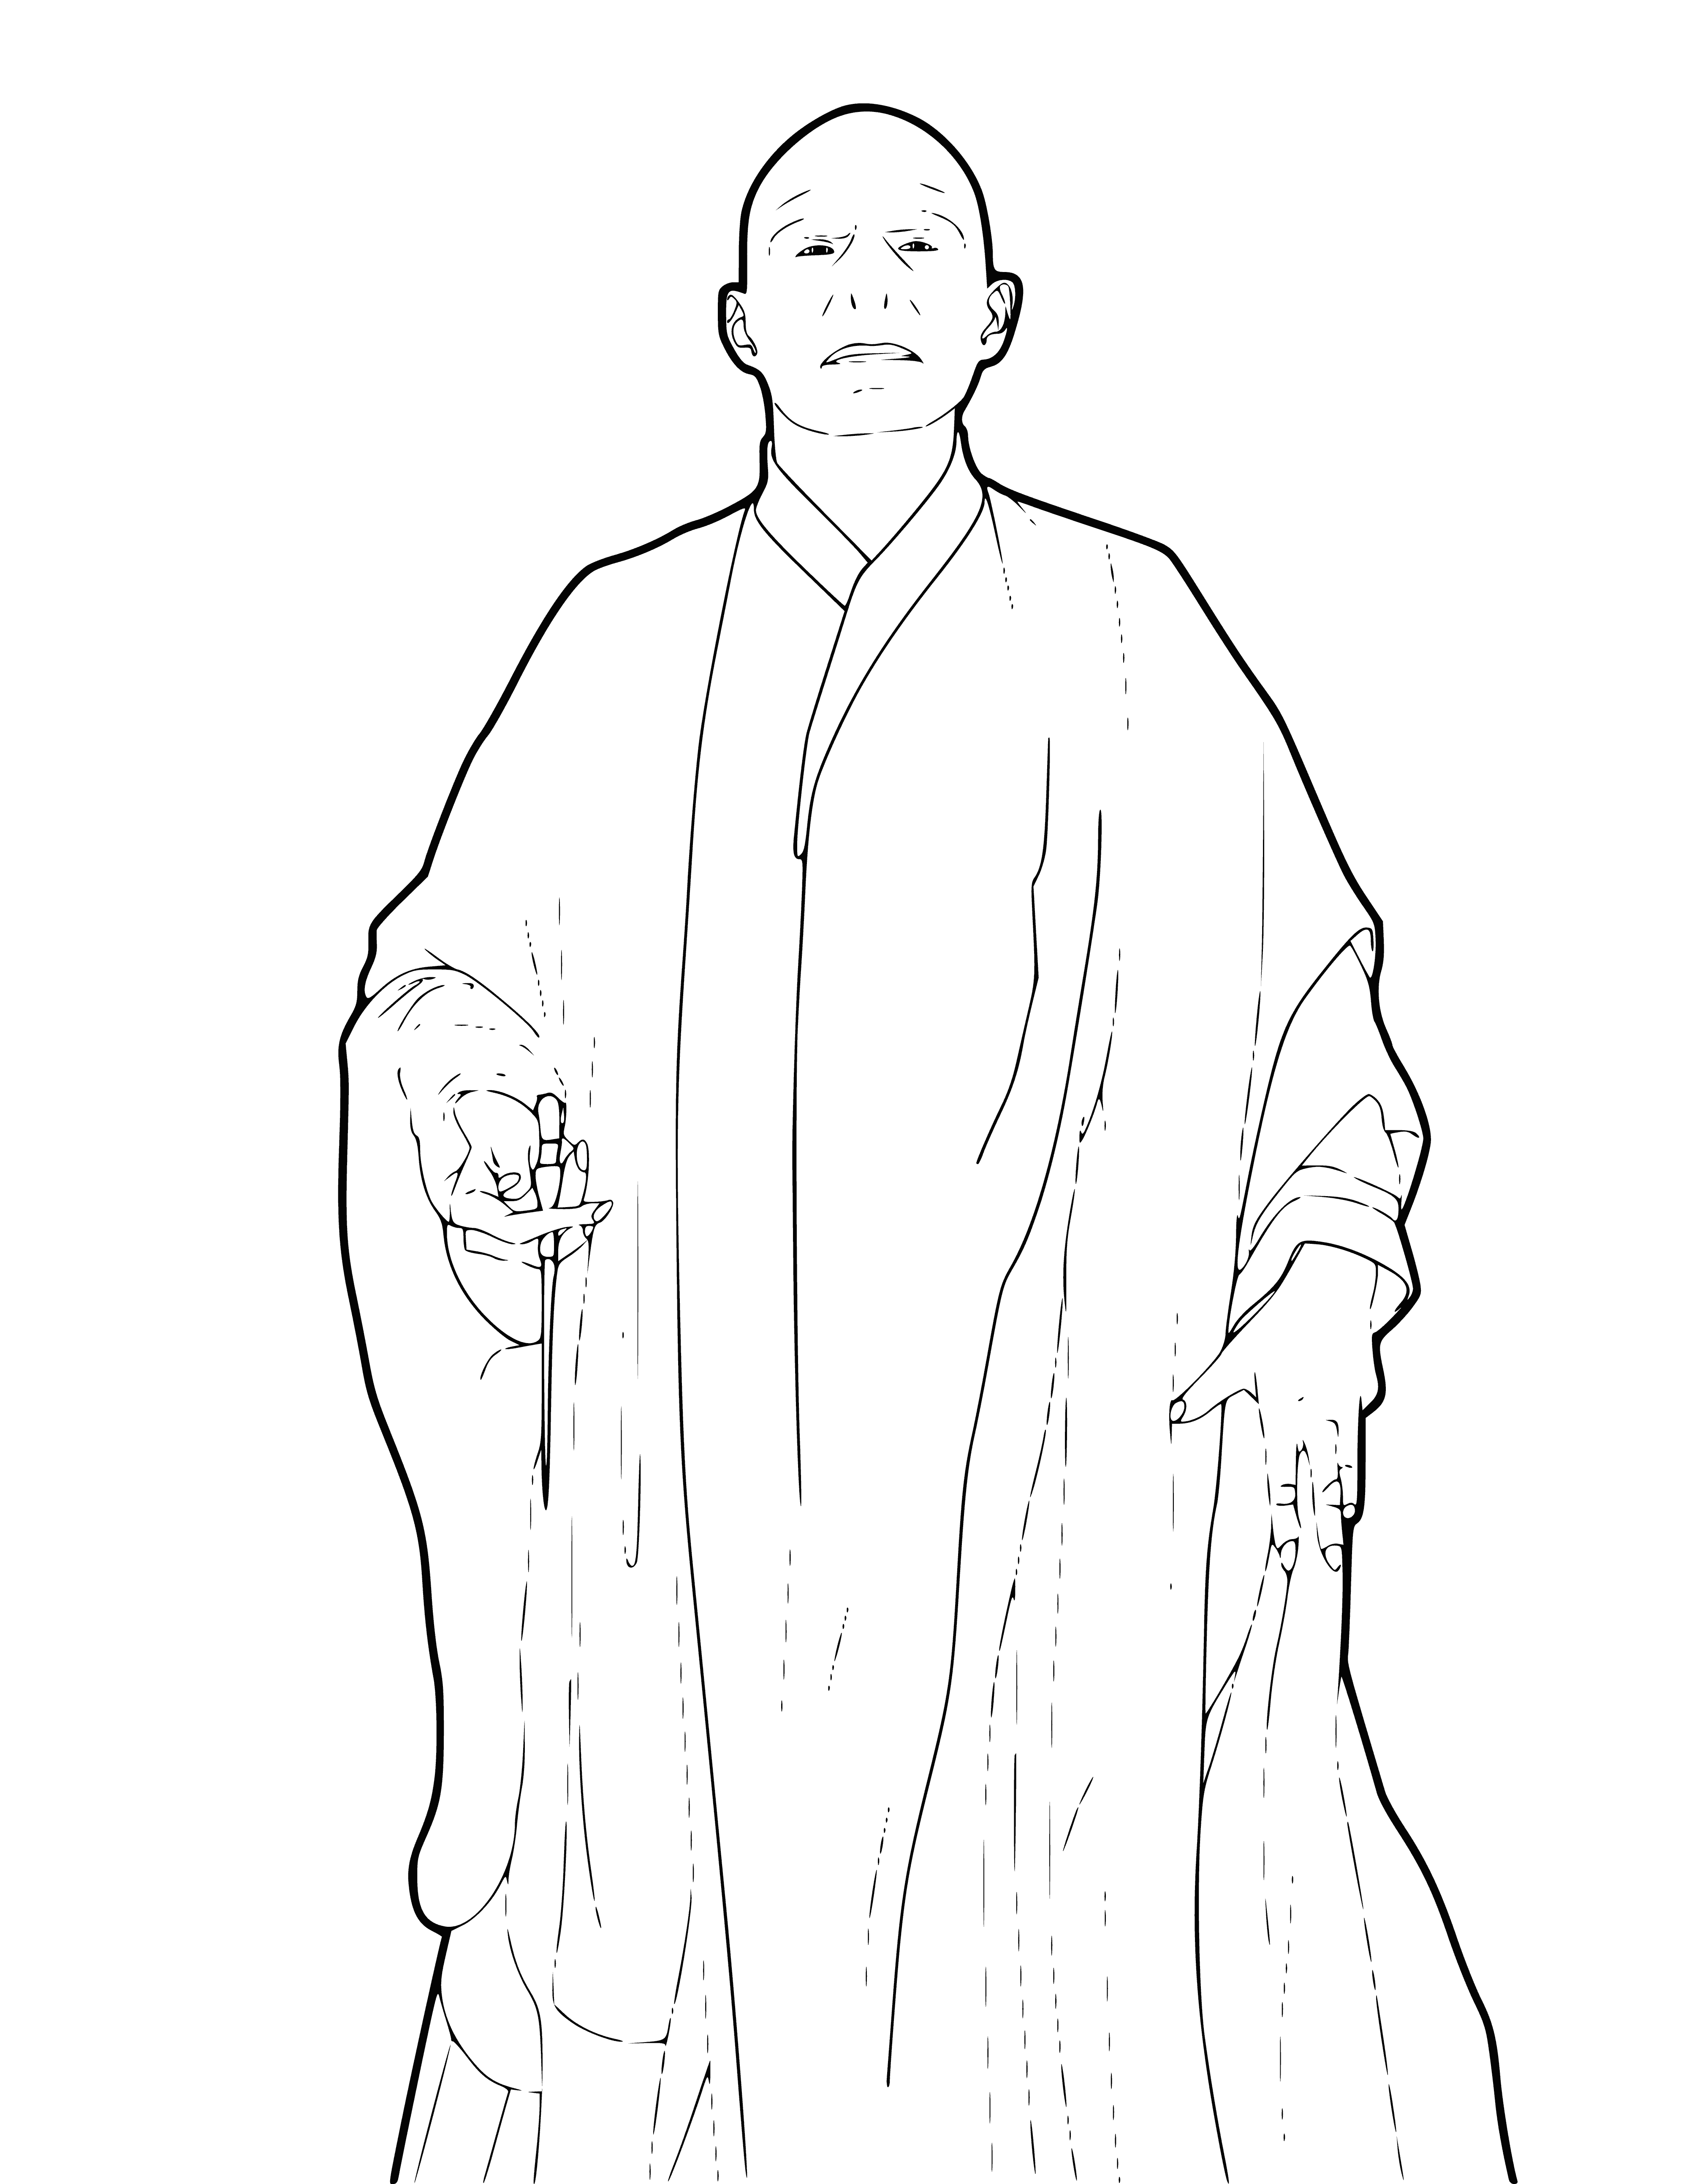 coloring page: Harry Potter confronts Voldemort, the pale, bald wizard with a long nose, in a chair.